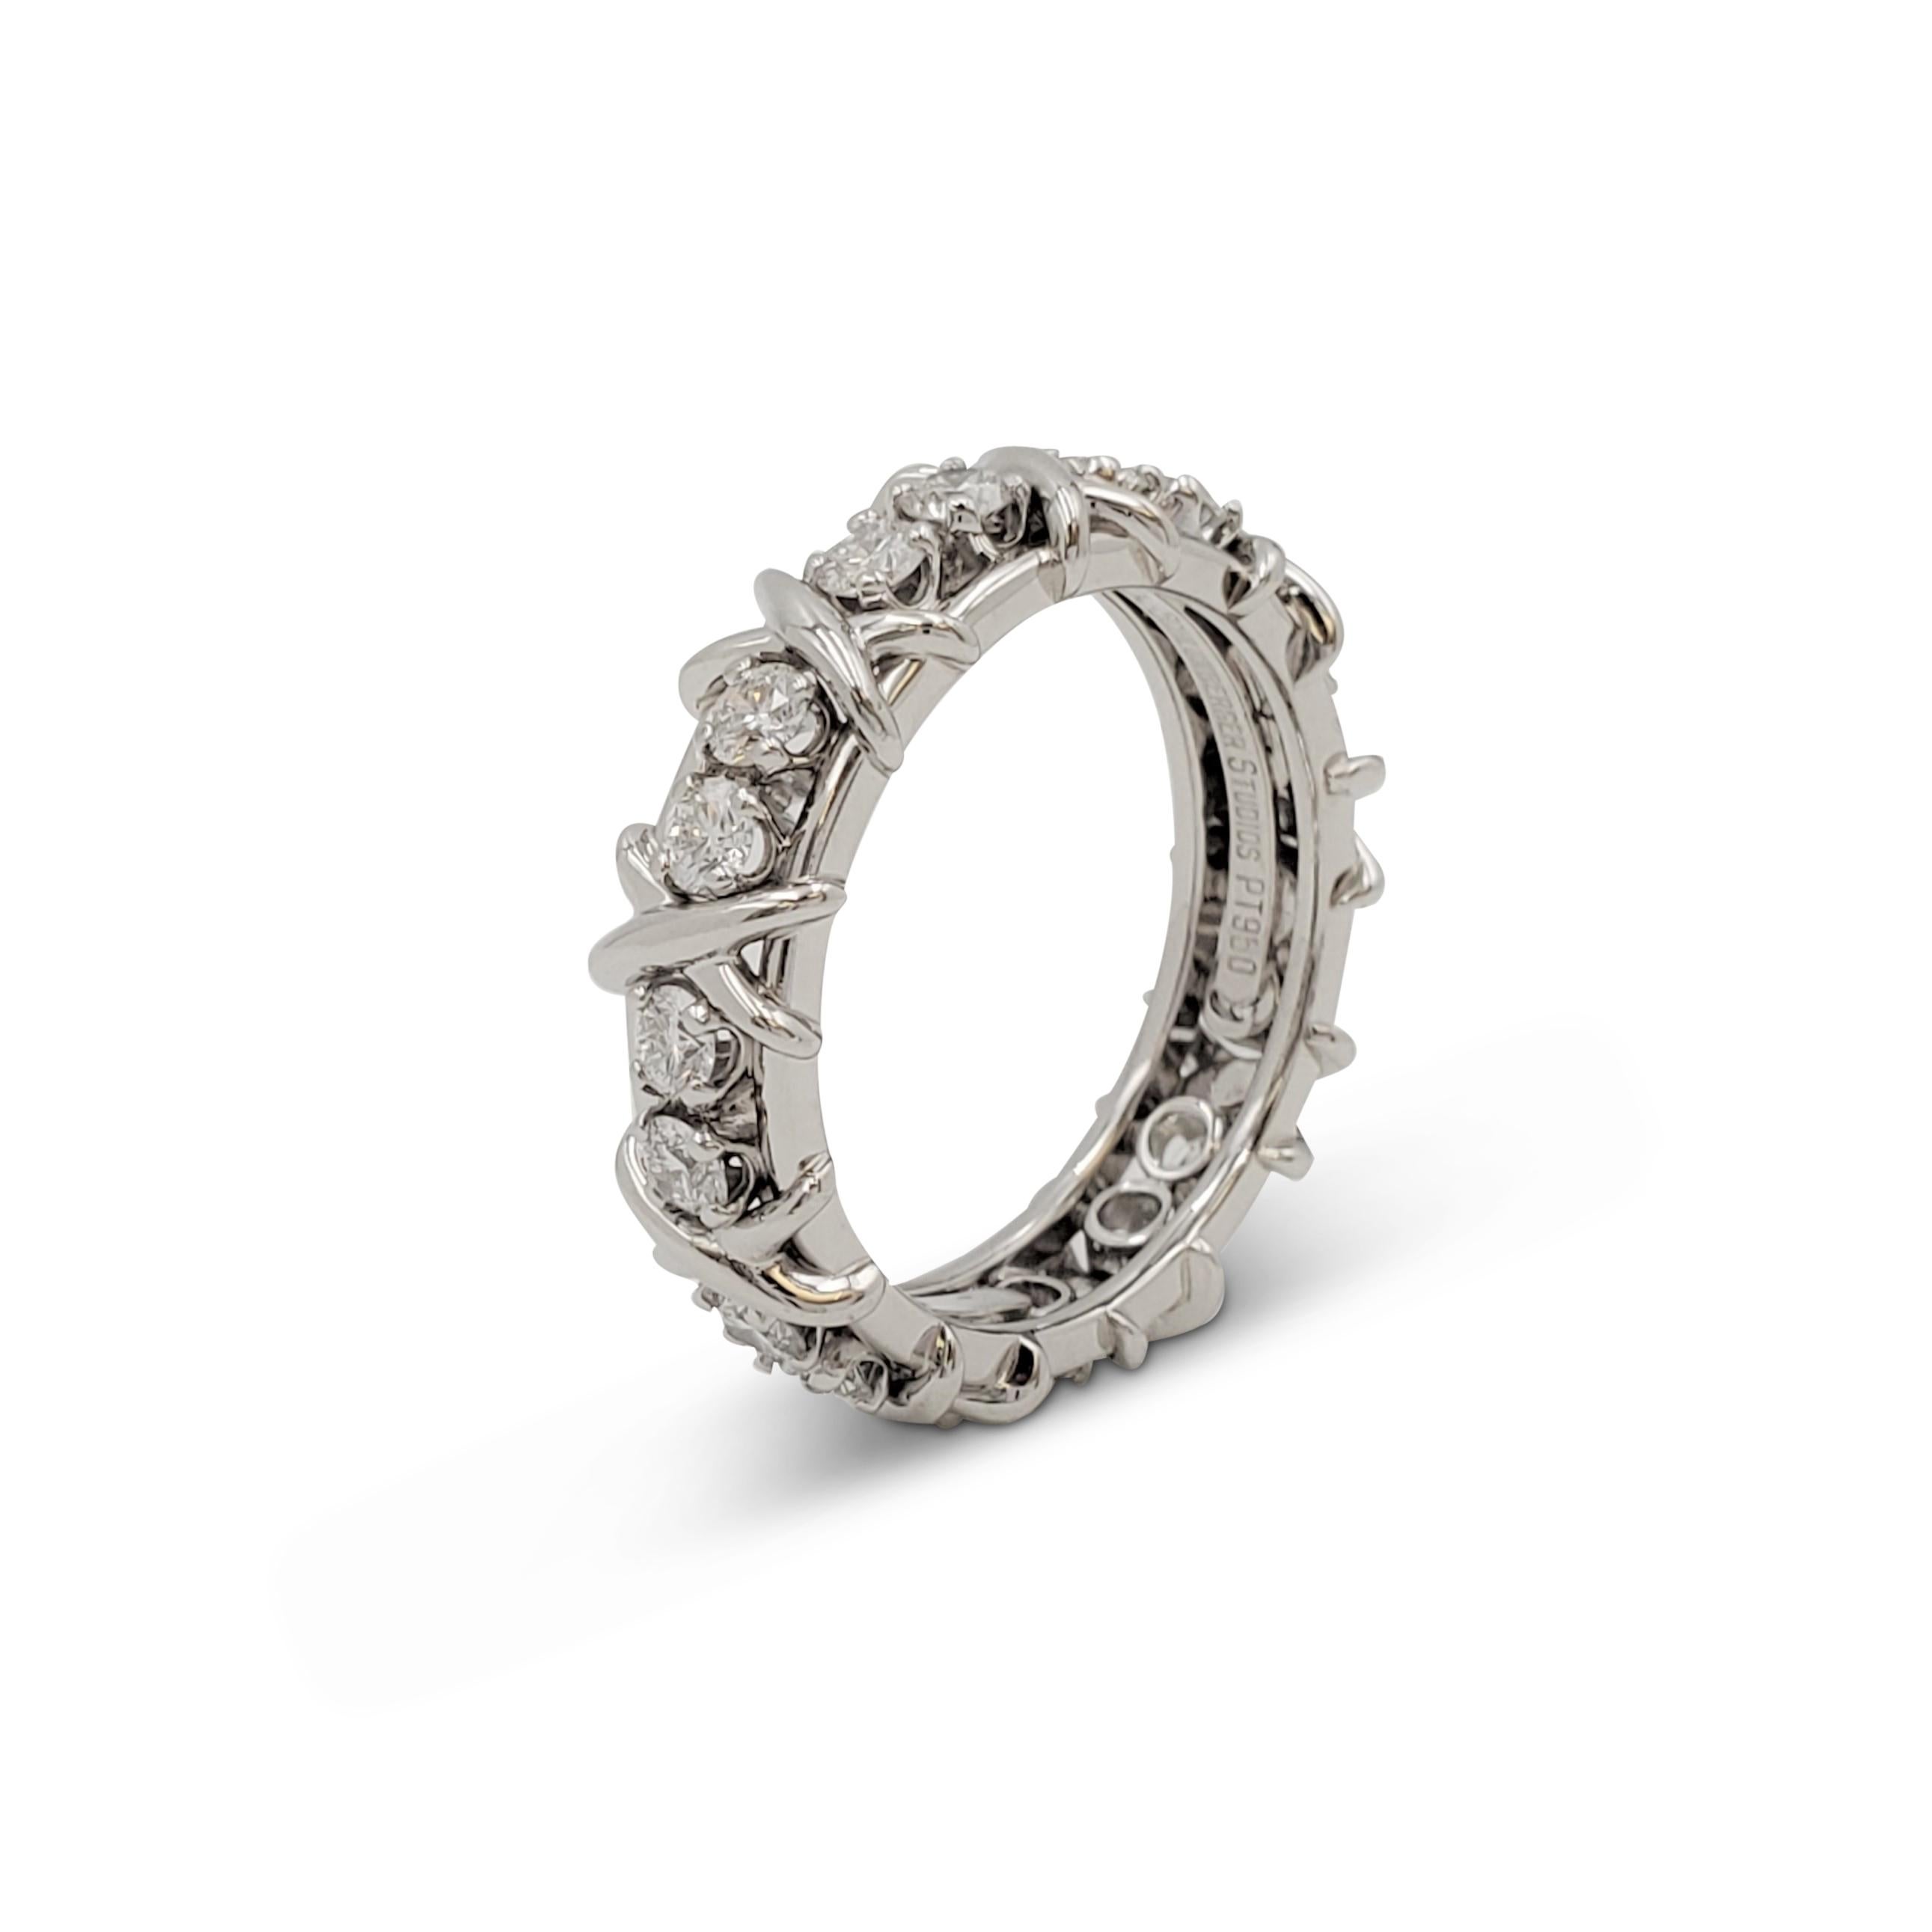 Authentic Schlumberger for Tiffany & Co. ring crafted in platinum comprised of platinum X's and eighteen sparkling round brilliant cut diamonds weighing an estimated 1.33 carats (E-F, VS). Signed Tiffany & Co. Schlumberger Studios, Au750, PT950.